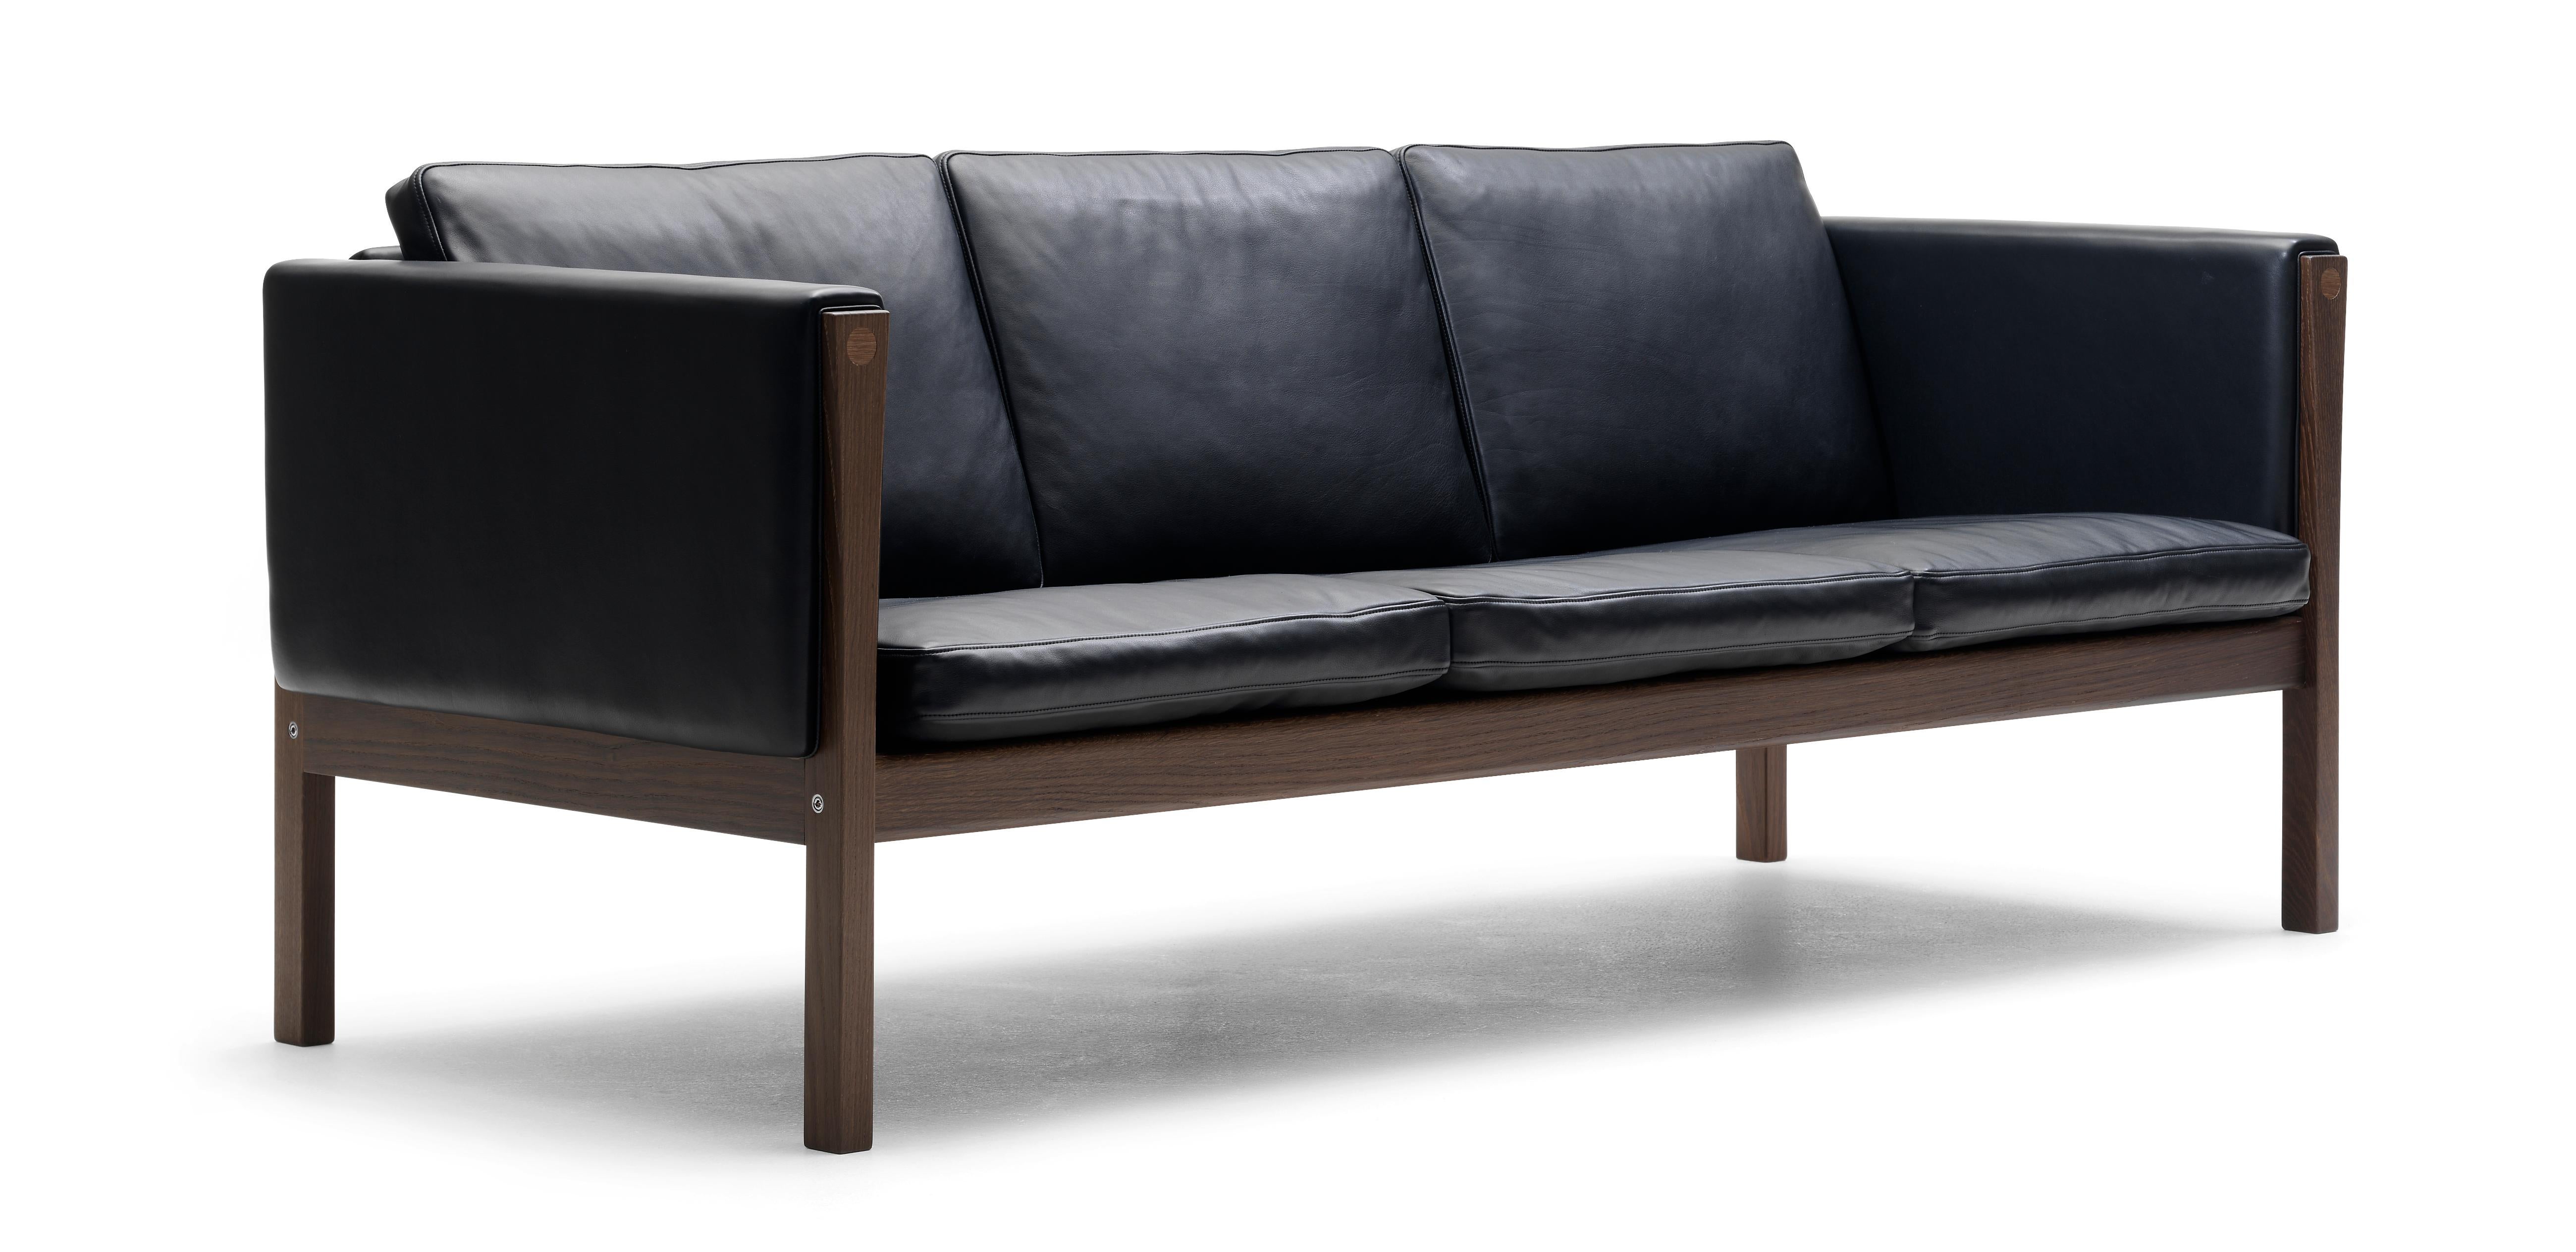 Black (Sif 98) CH163 Sofa in Walnut Oil Frame with Leather Upholstery by Hans J. Wegner 2